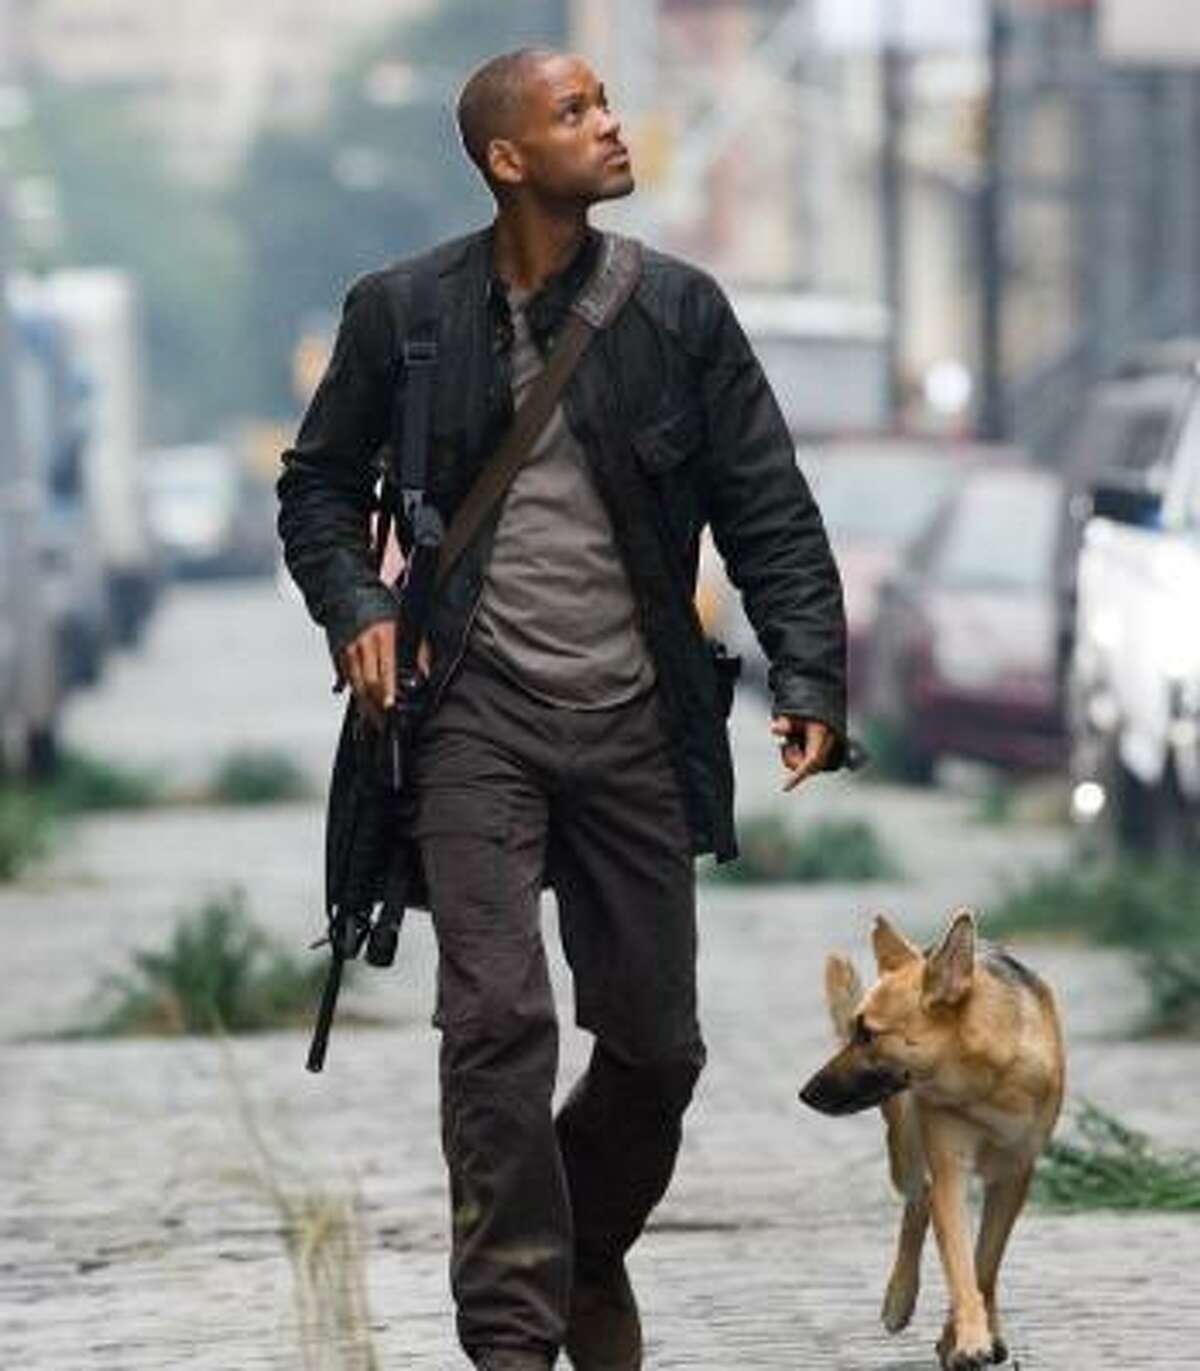 Robert Neville (Will Smith) is the last man on Earth in I Am Legend. The film earned $76.5 million at the weekend box office.